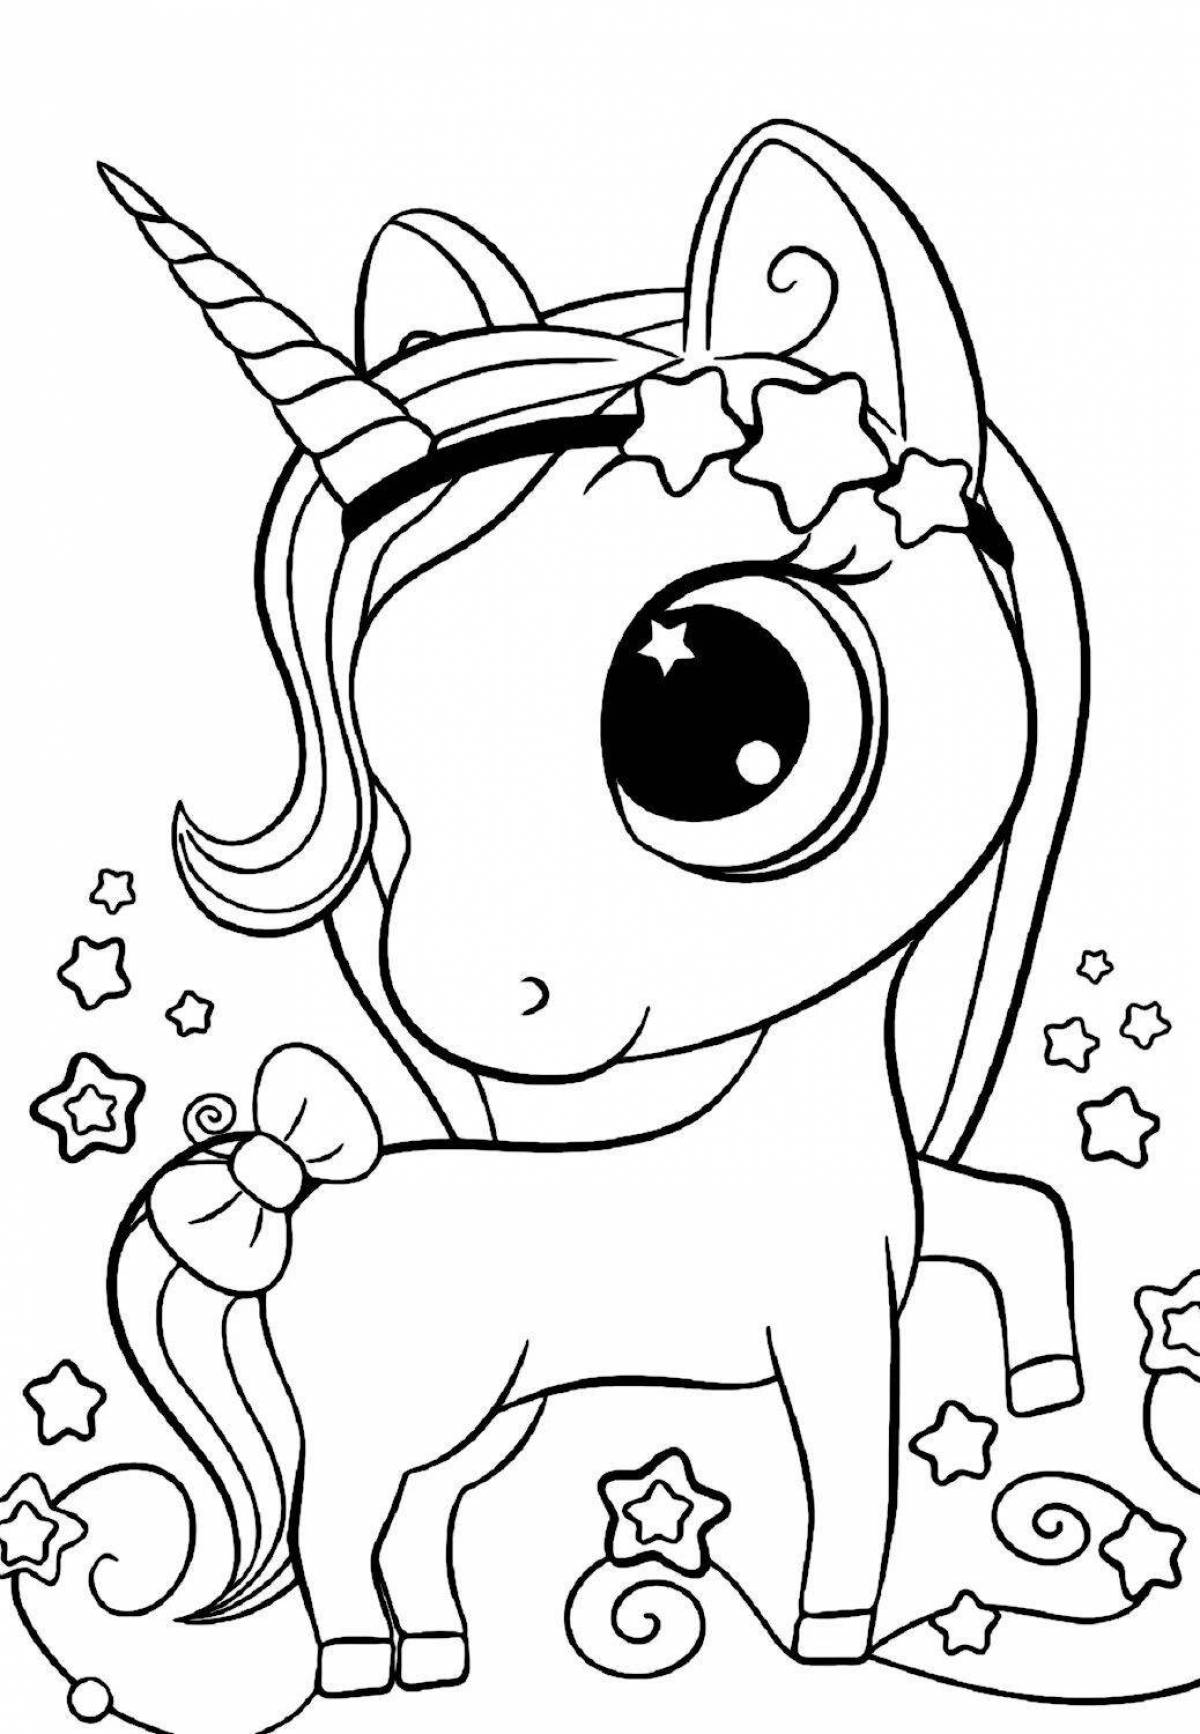 Coloring book for girls 7 years old unicorn